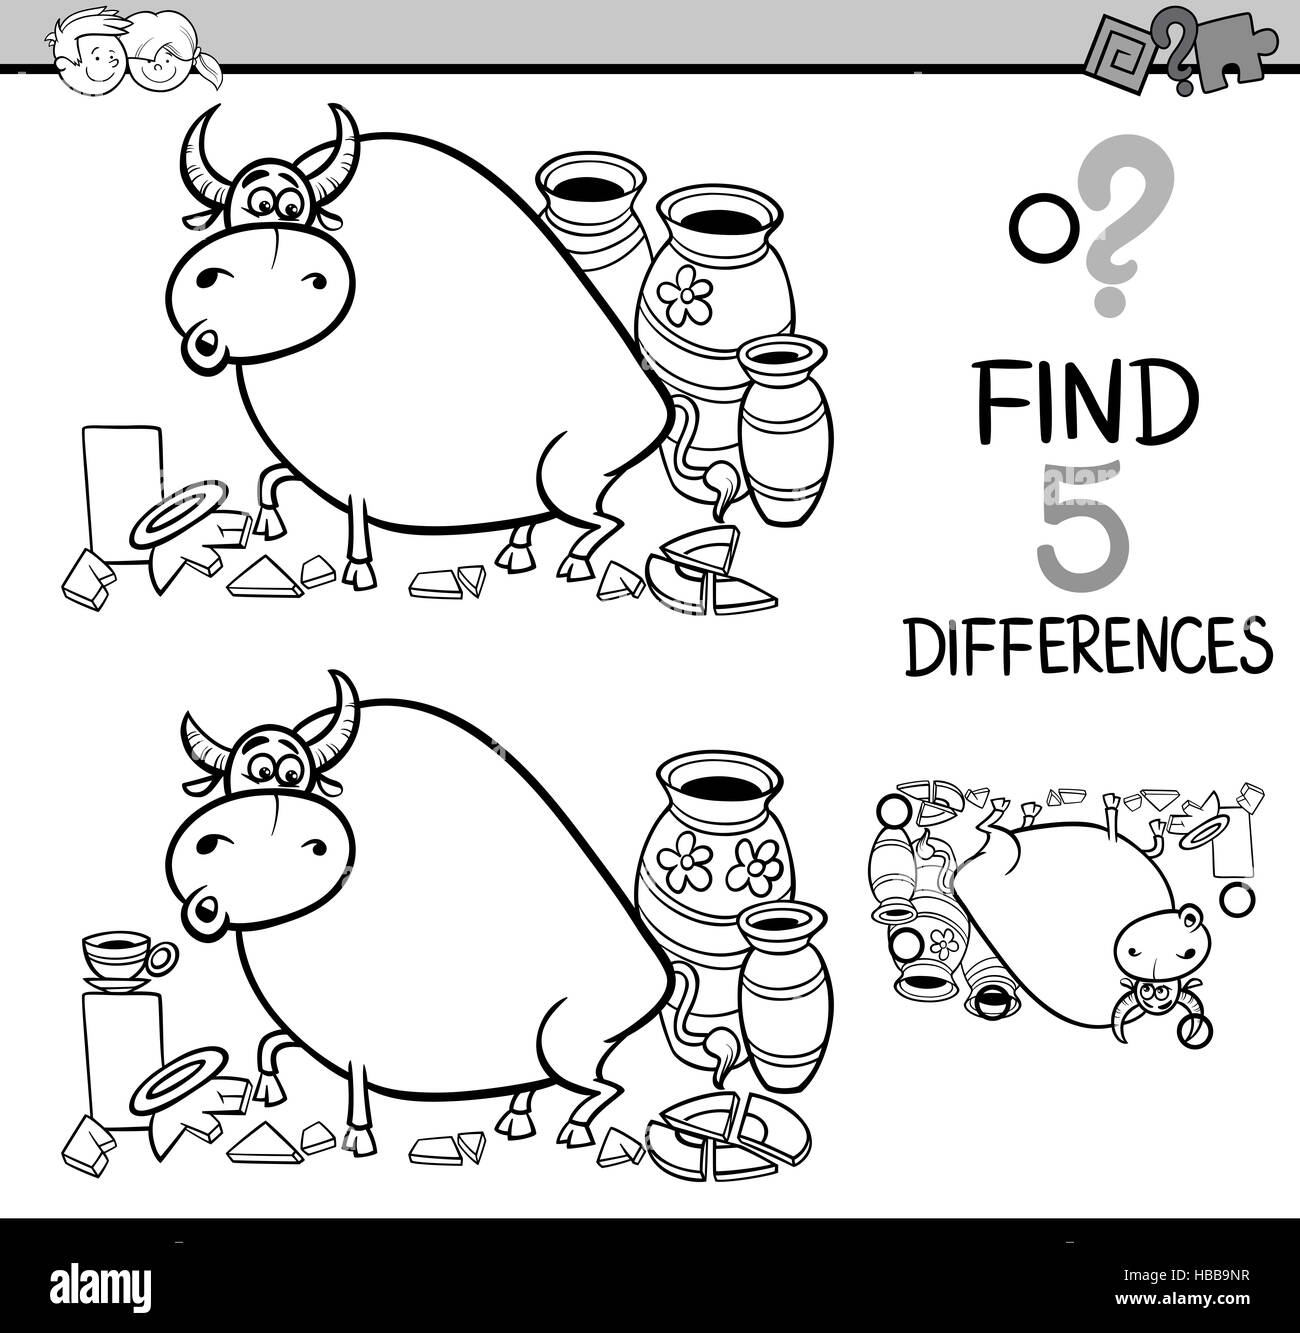 differences activity coloring book Stock Photo